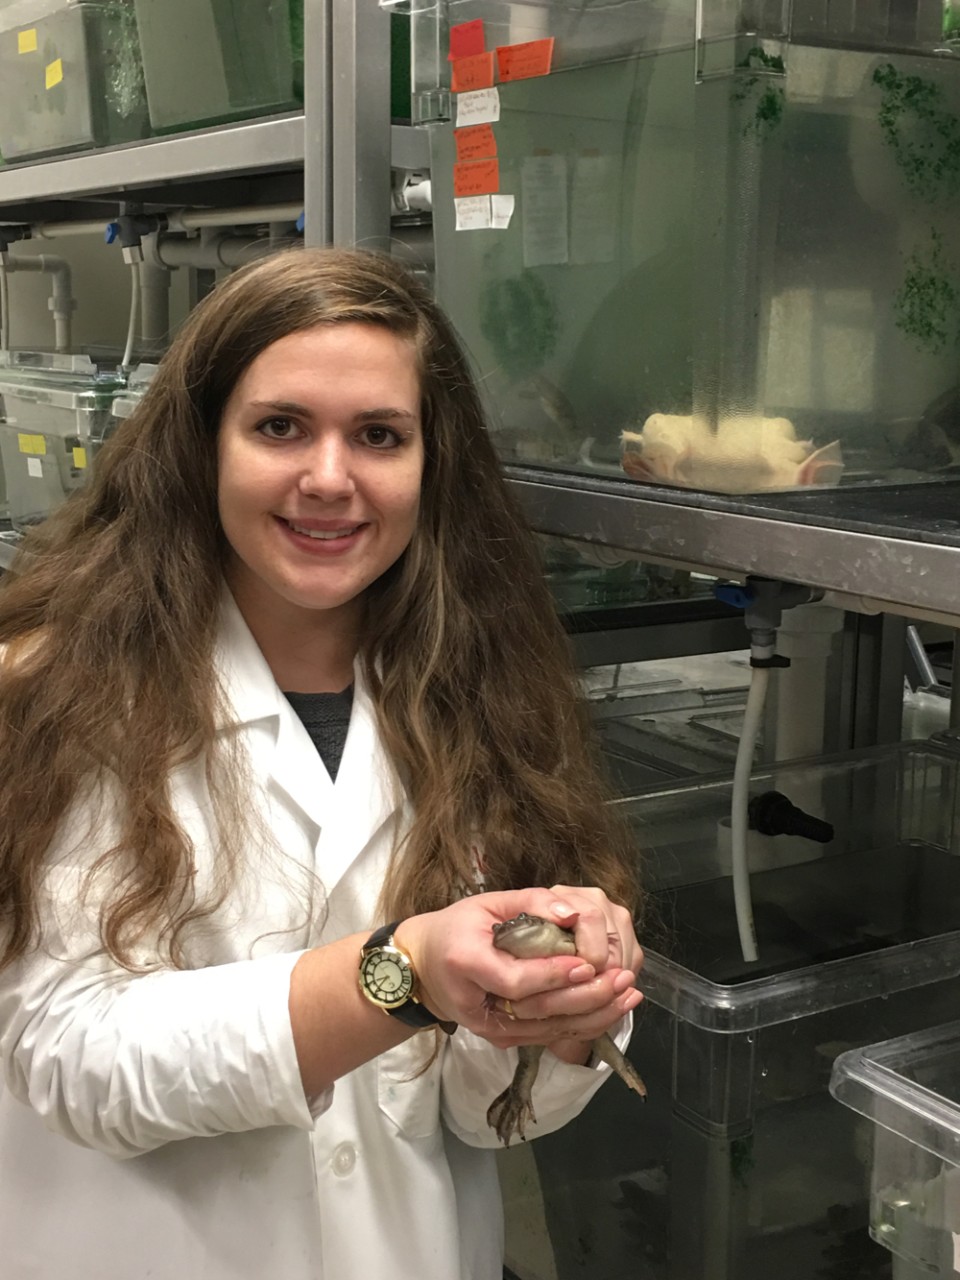 UC biology grad student, Katelin Schneider holds a full-grown frog used in her biology research lab. photo/Katelin Schneider